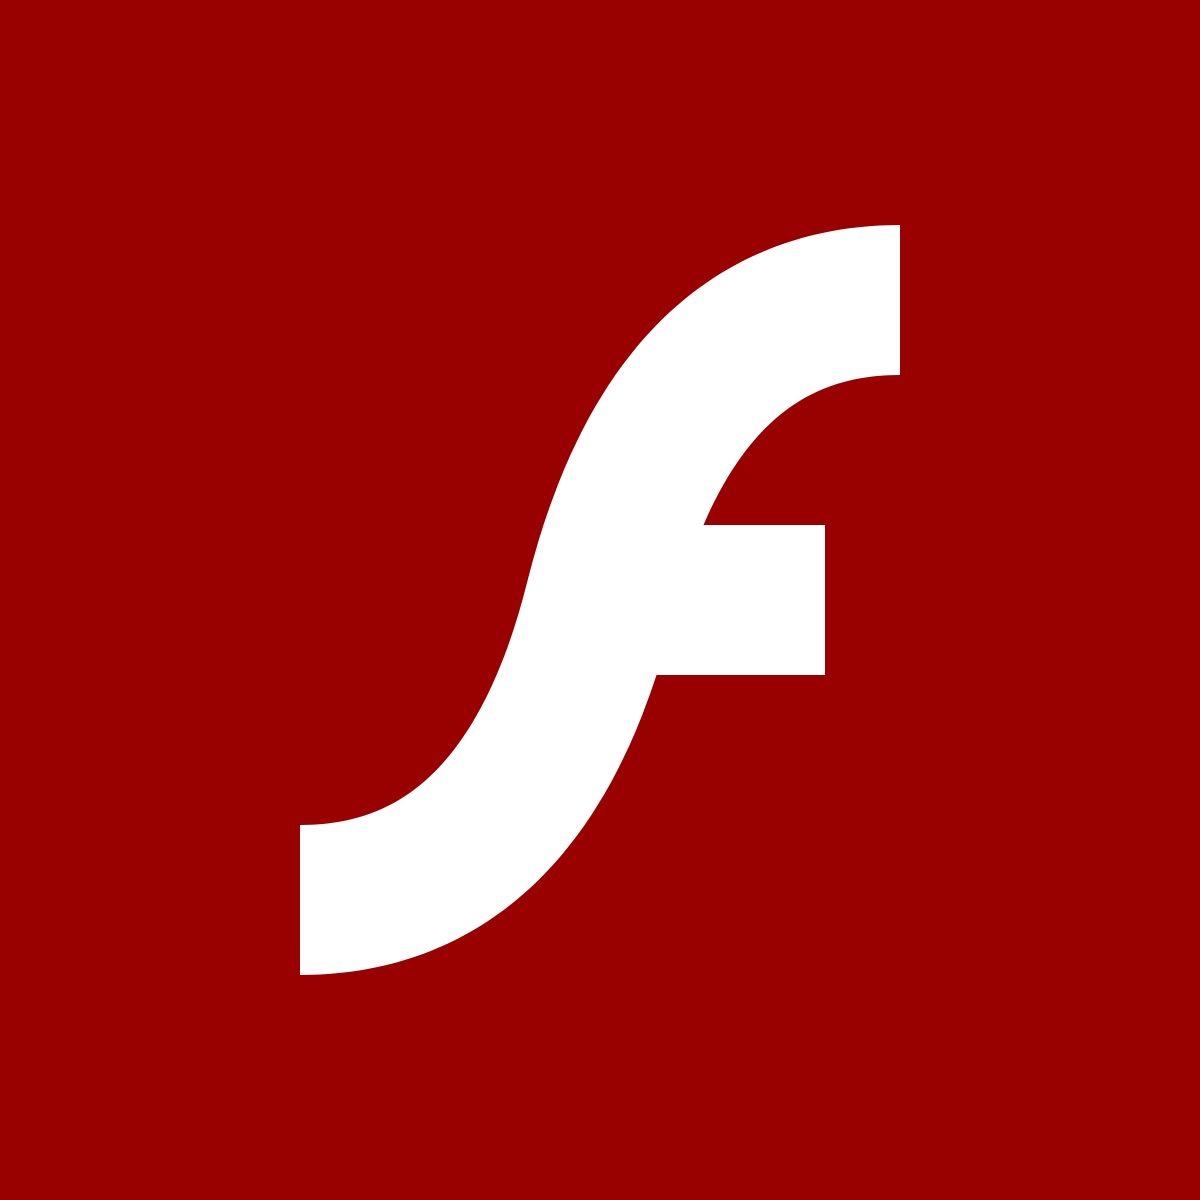 Download Flash For Mac 10.5 8